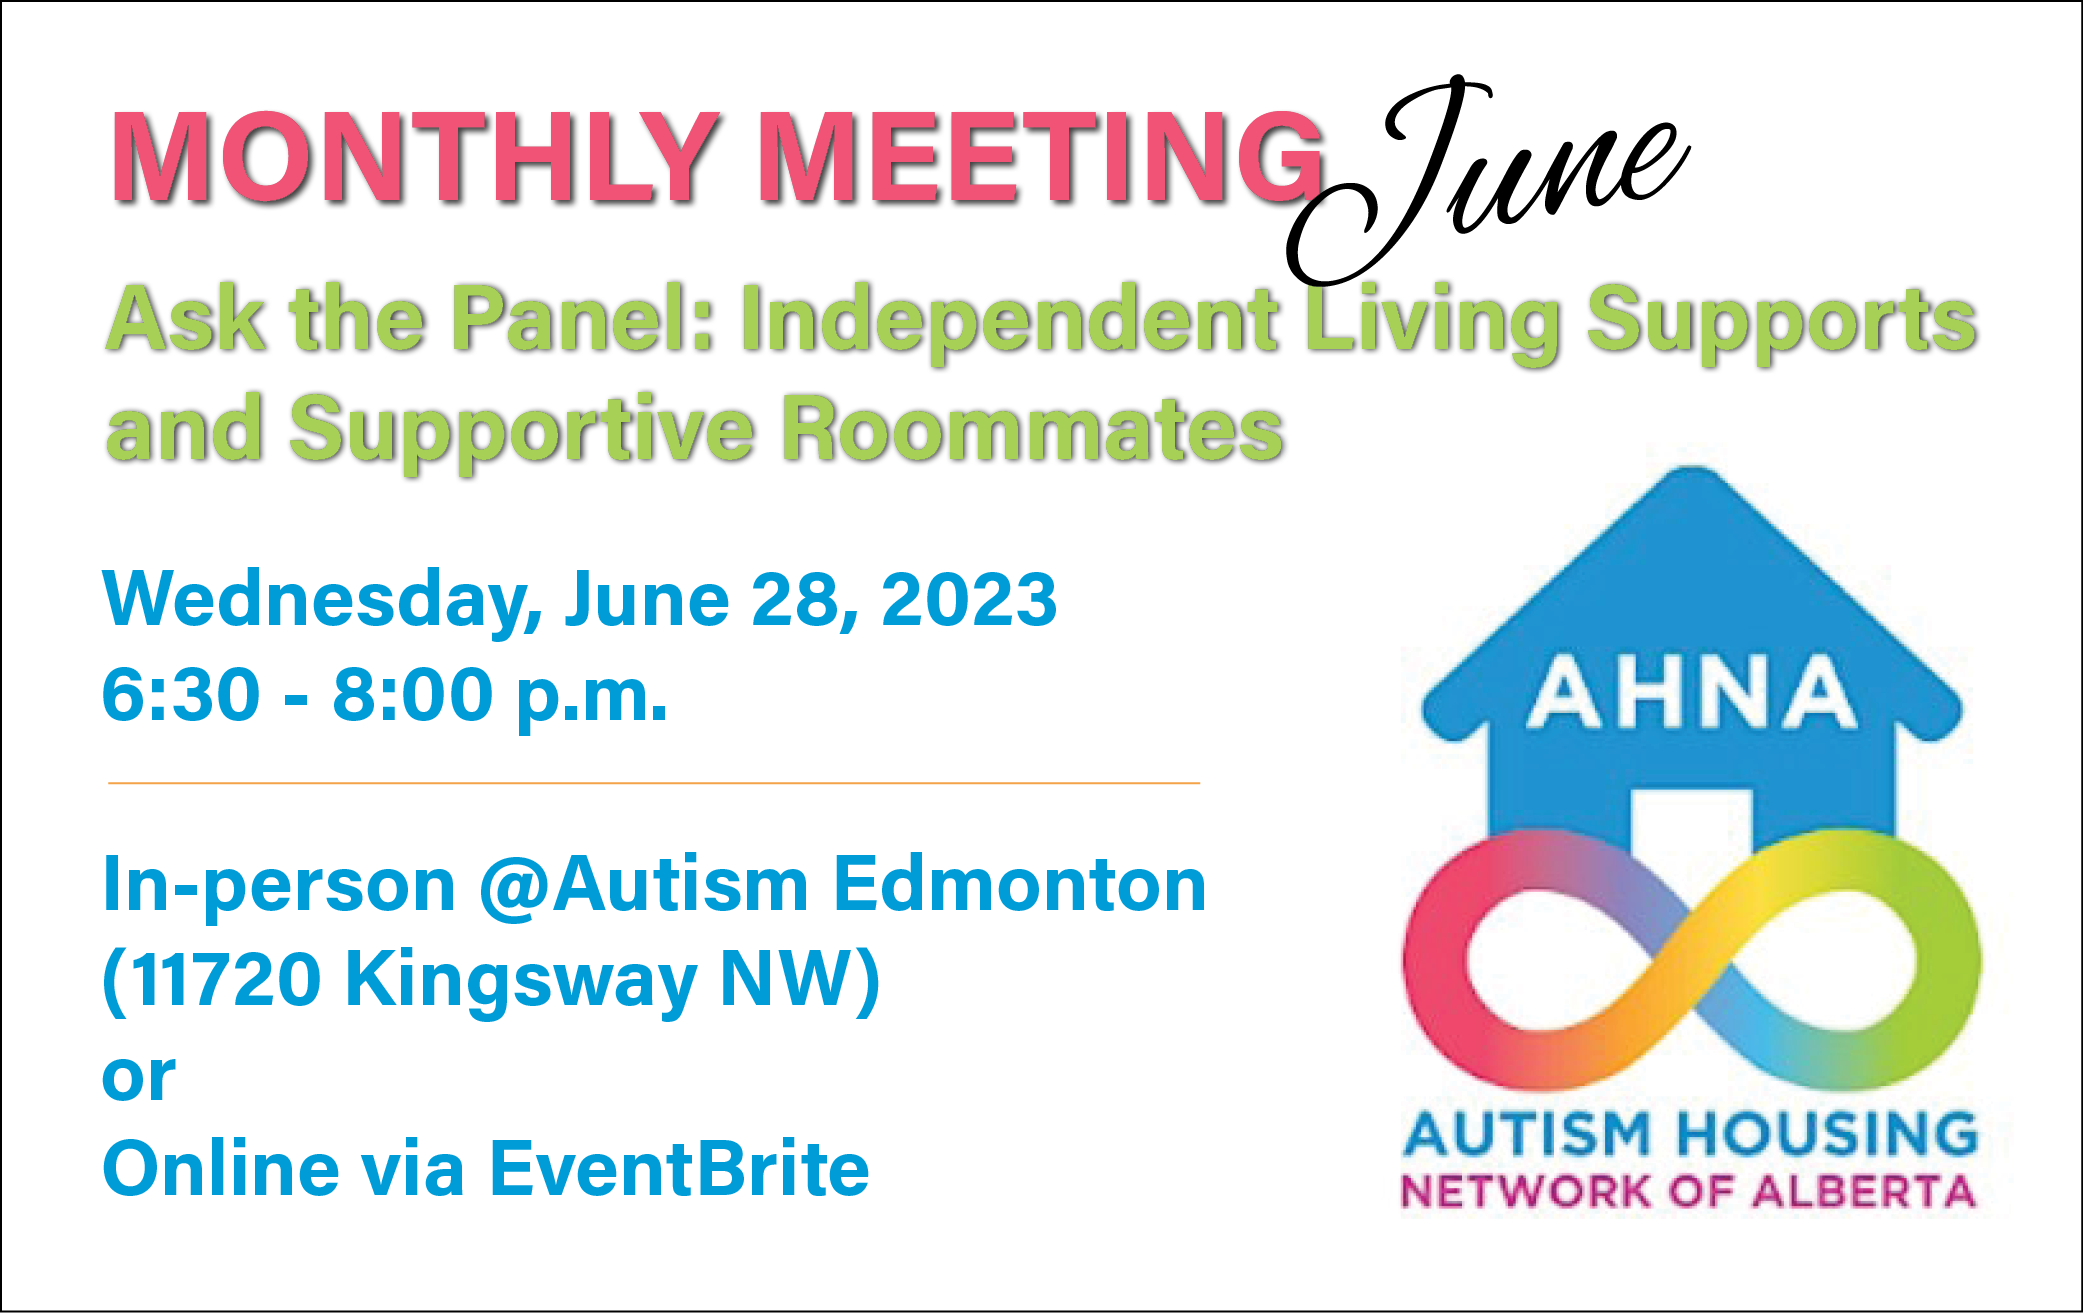 This image has text that reads, "Monthly Meeting June" along with the title and event details. The image on it is a blue house sitting on a rainbow infinity symbol, with the initials AHNA on the house.